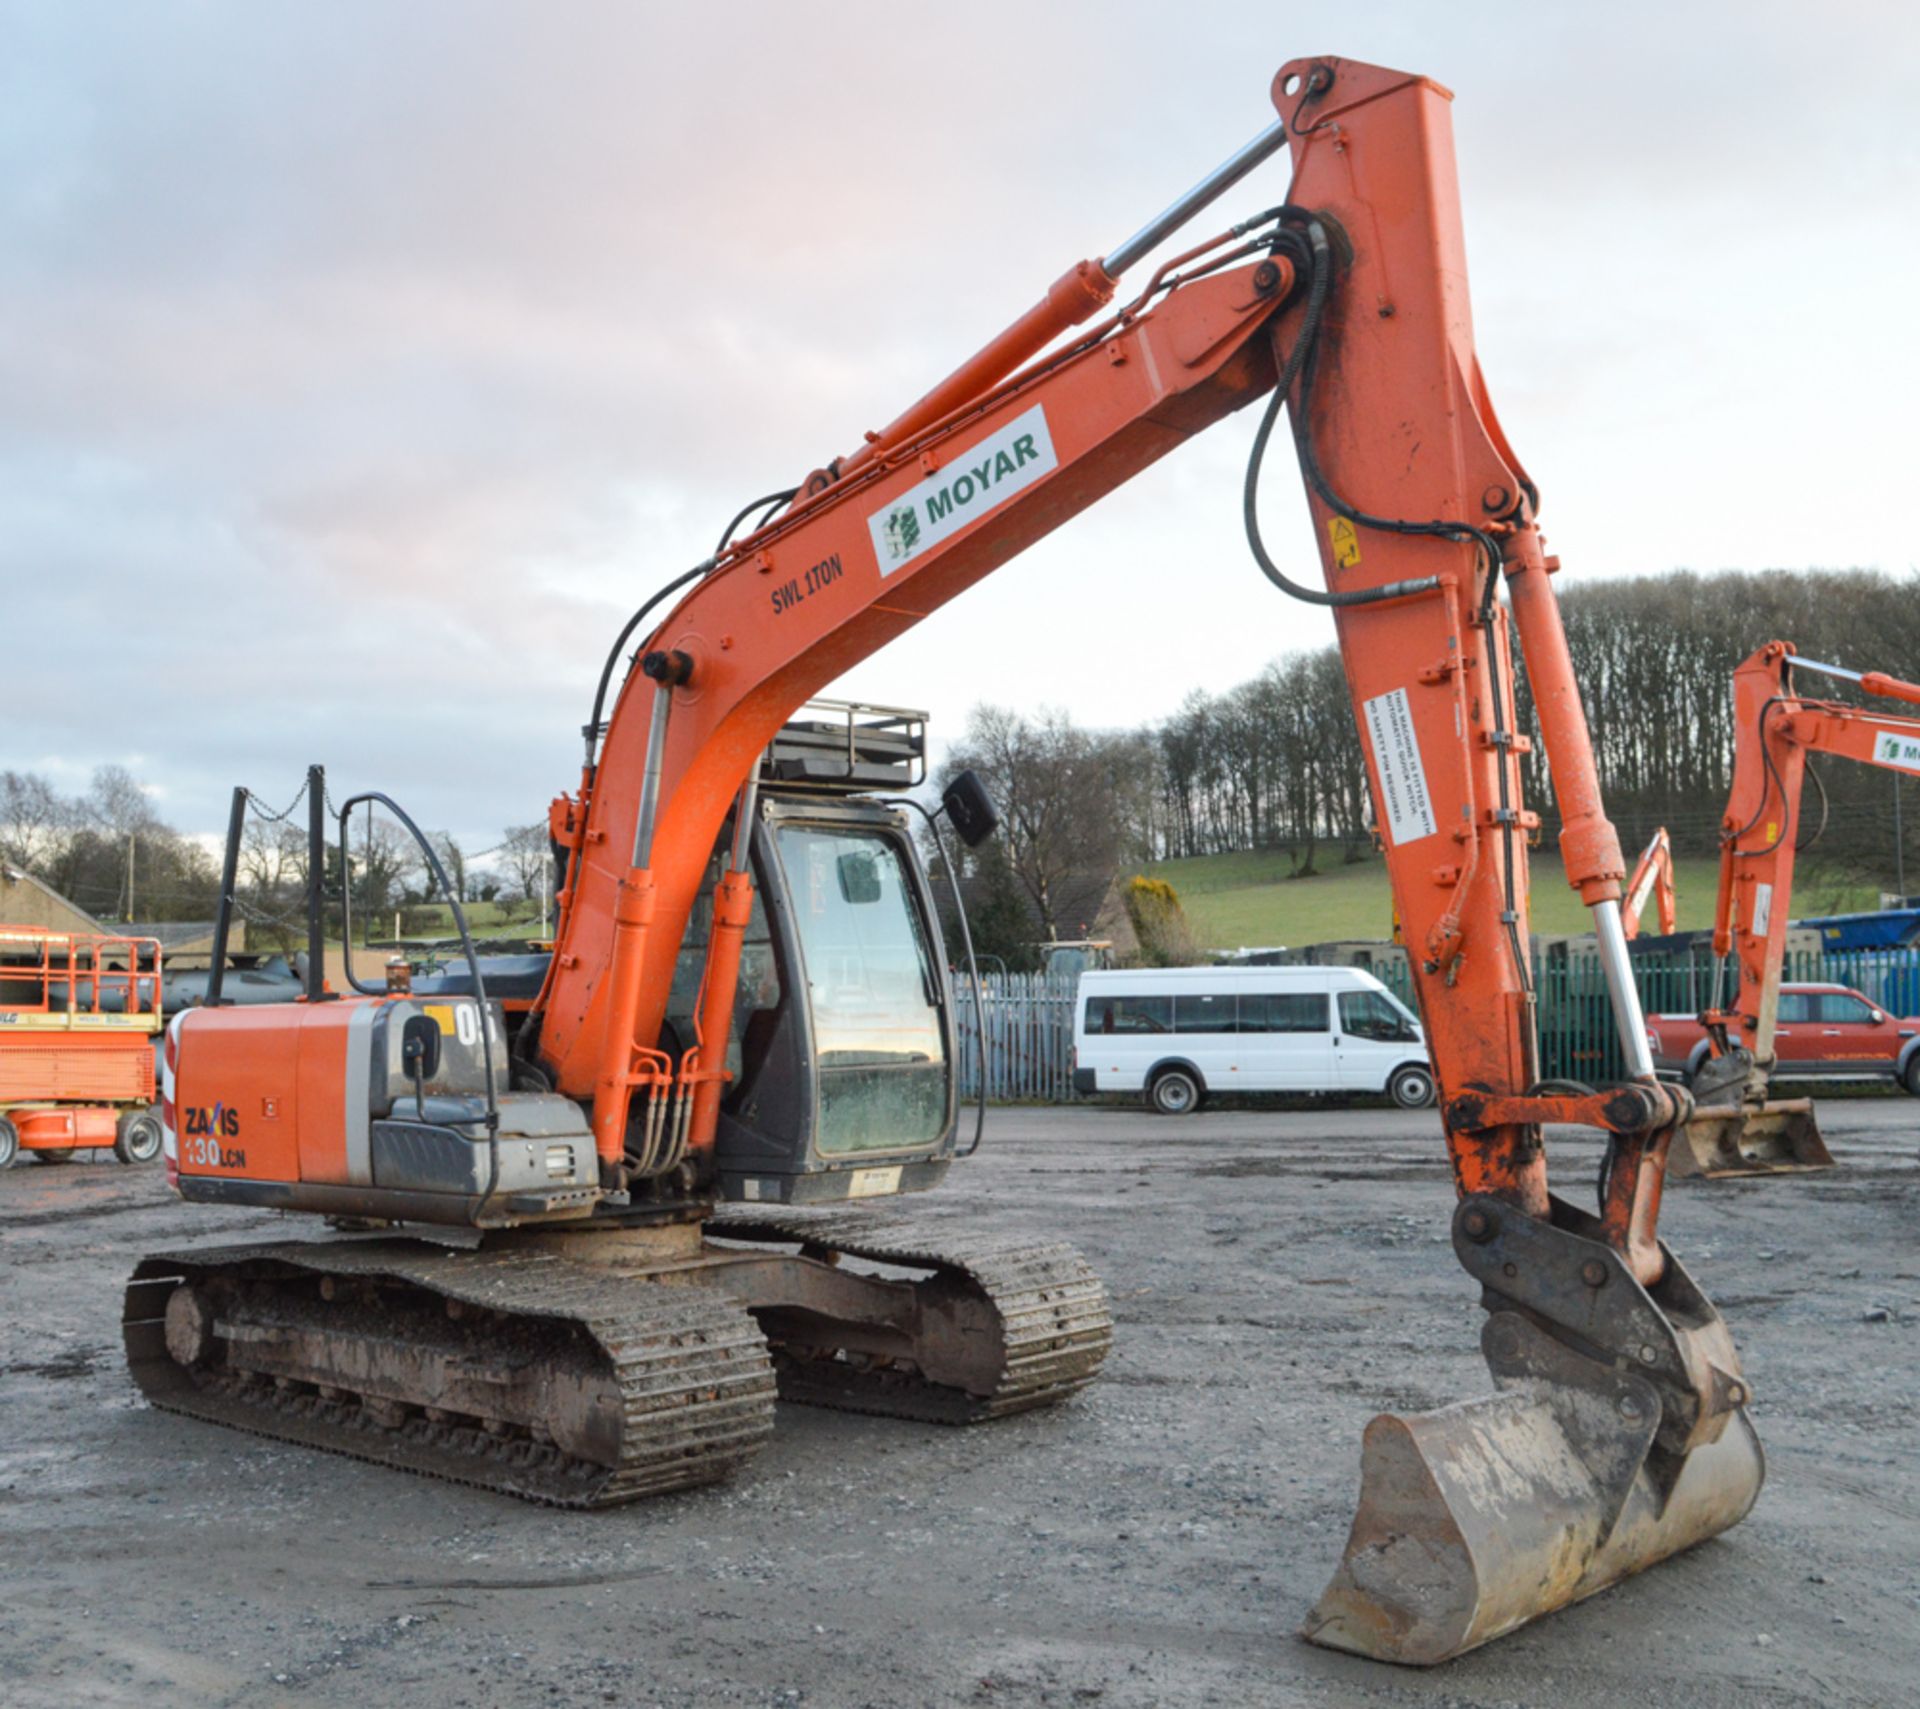 Hitachi ZX130 LCN-3 13 tonne steel tracked excavator Year: 2012 S/N: 86842 Recorded Hours: 5384 1